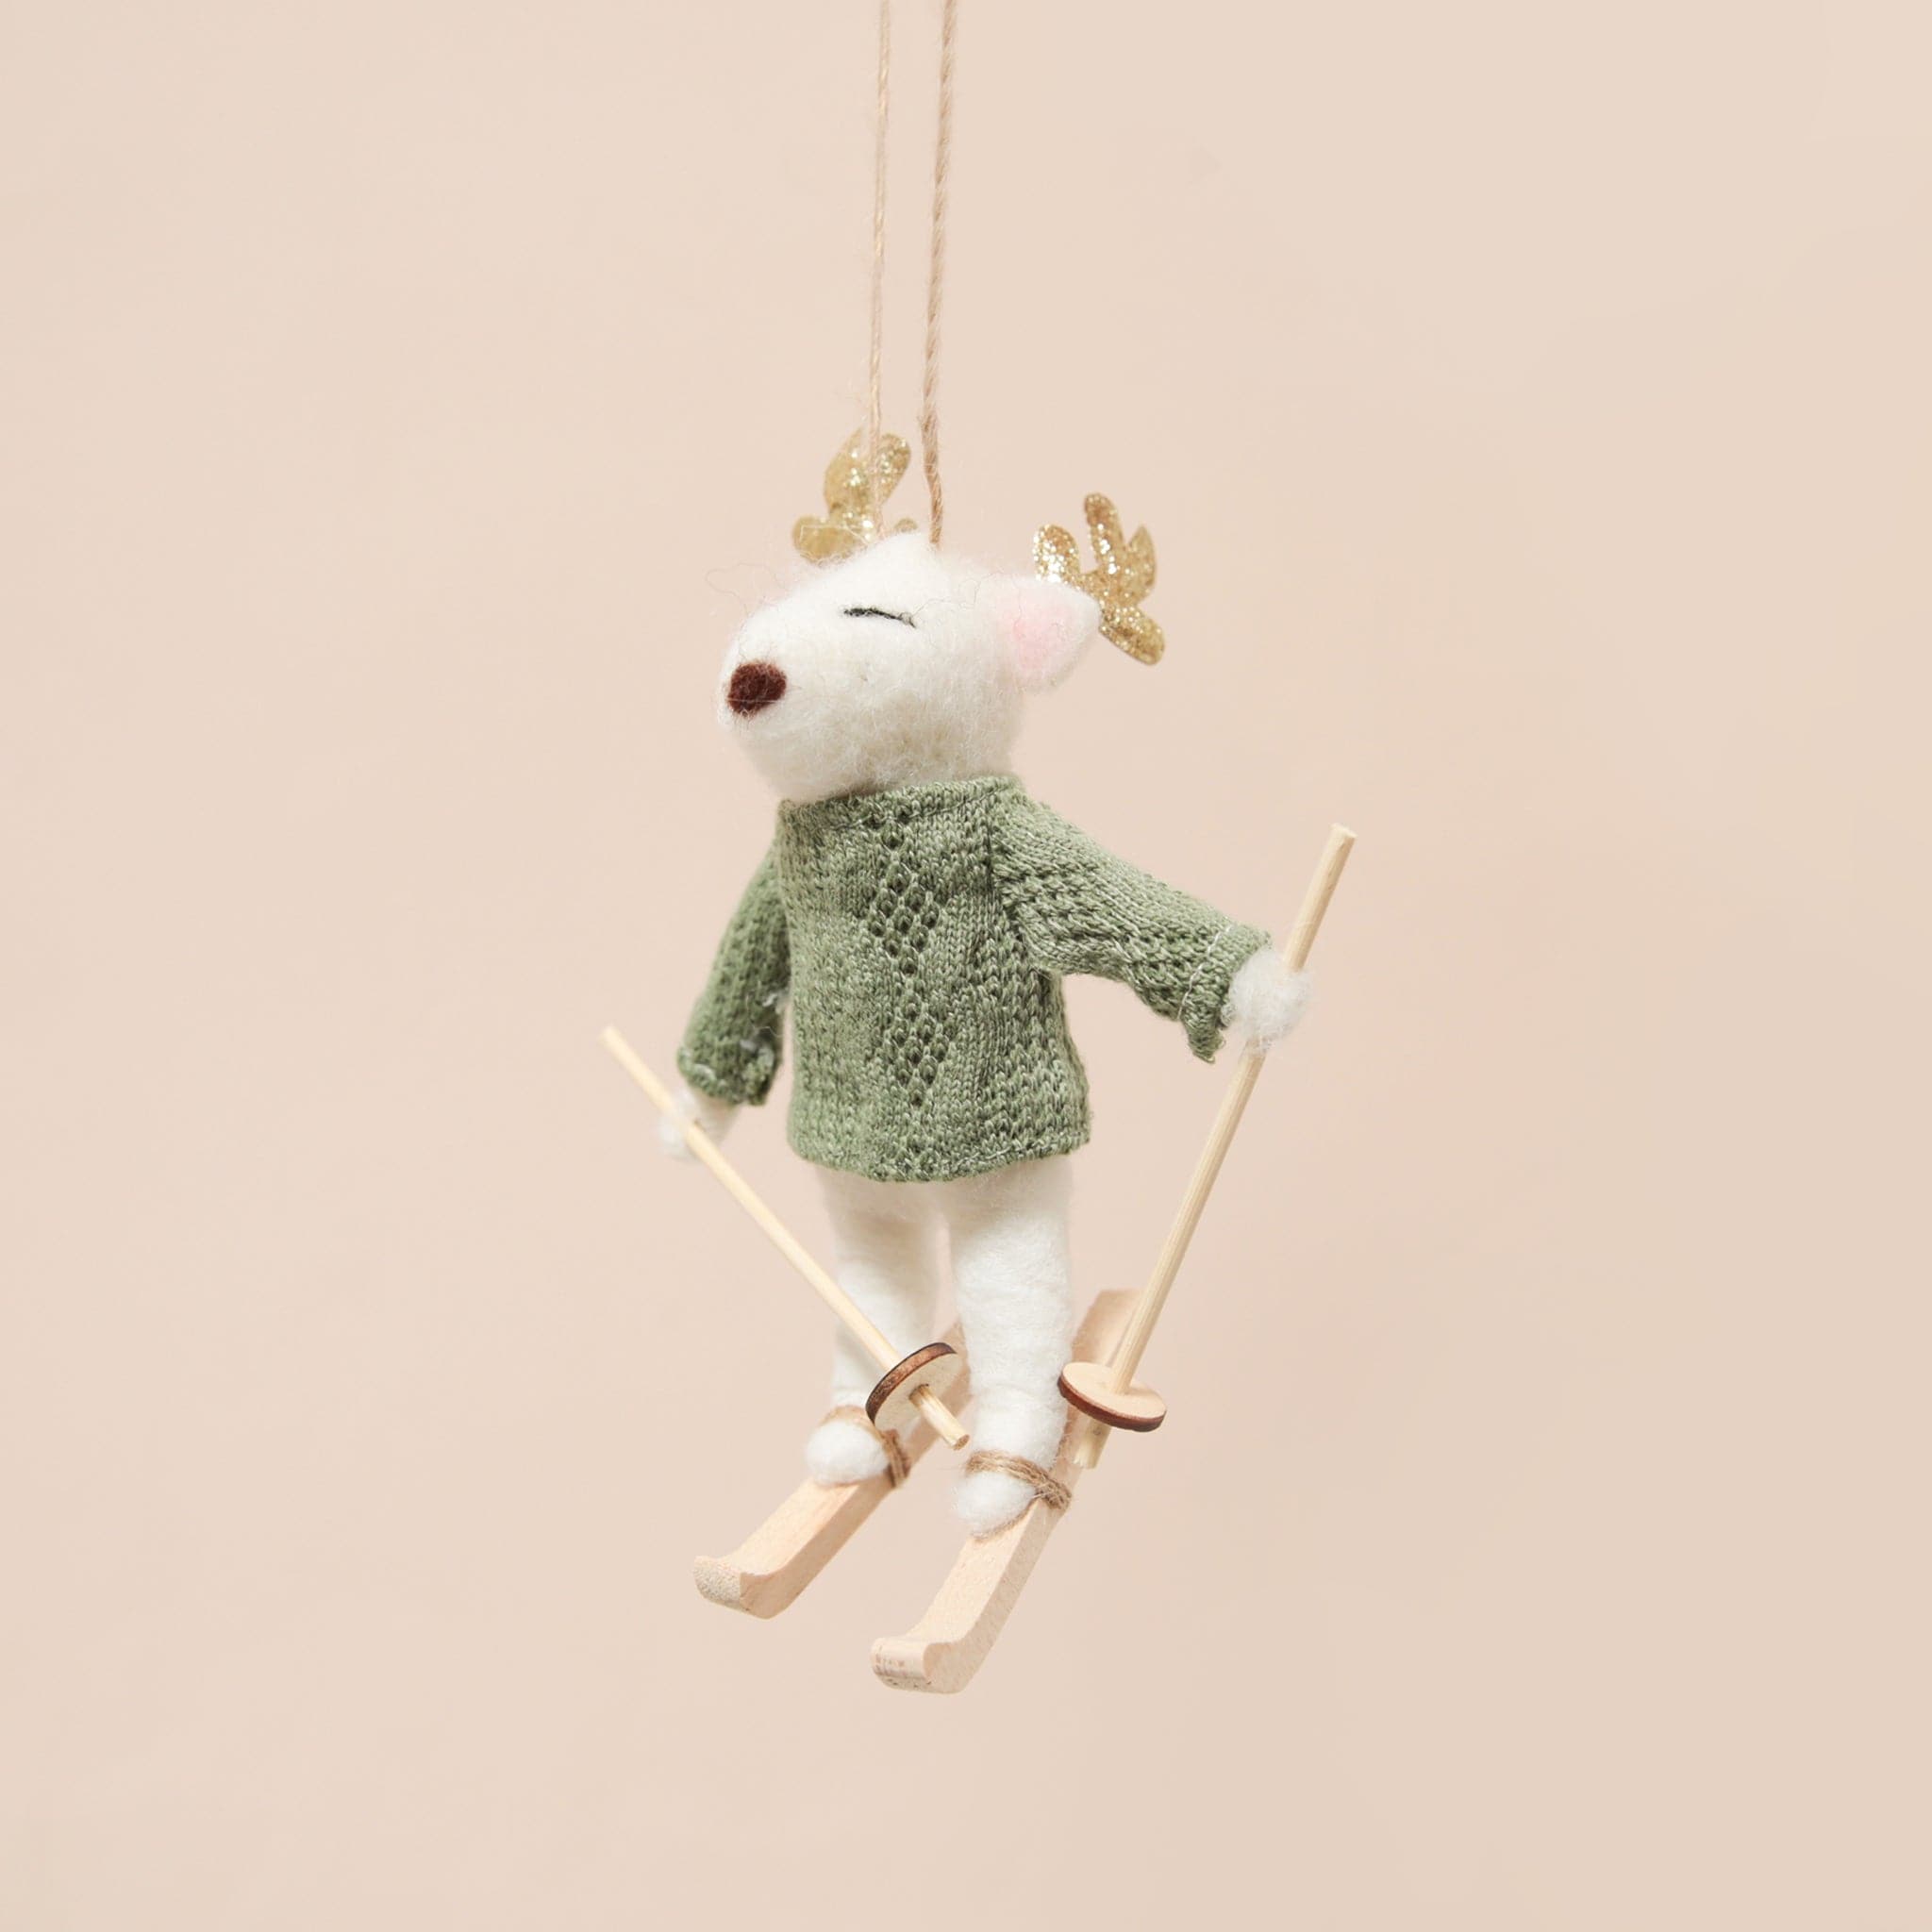 A white felt deer ornament in a green sweater on a pair of light wood skis as well as holding ski poles. The deers antlers are gold with sparkles.